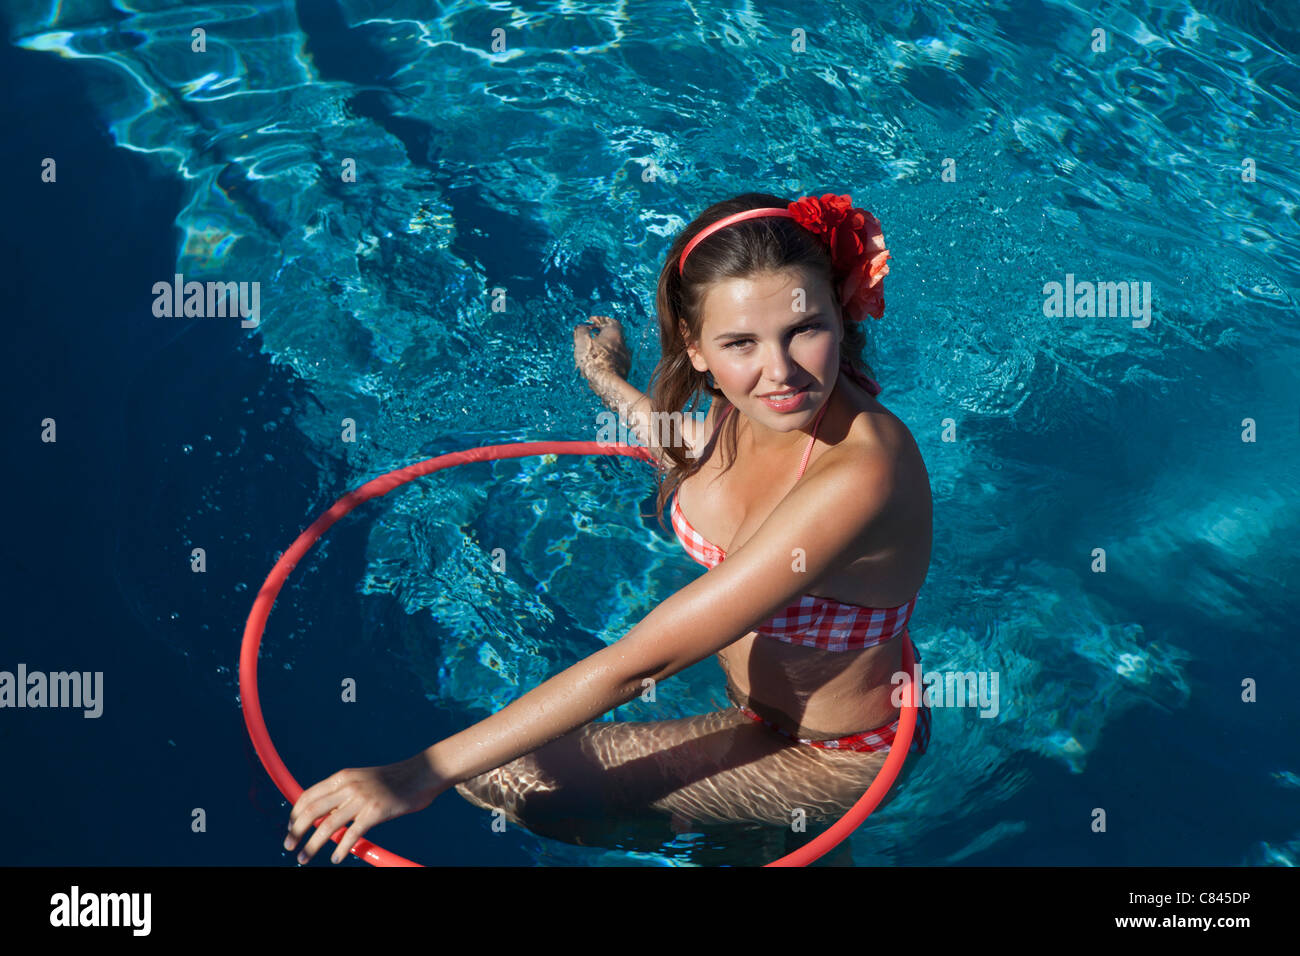 Woman playing with hula hoop in pool Stock Photo - Alamy